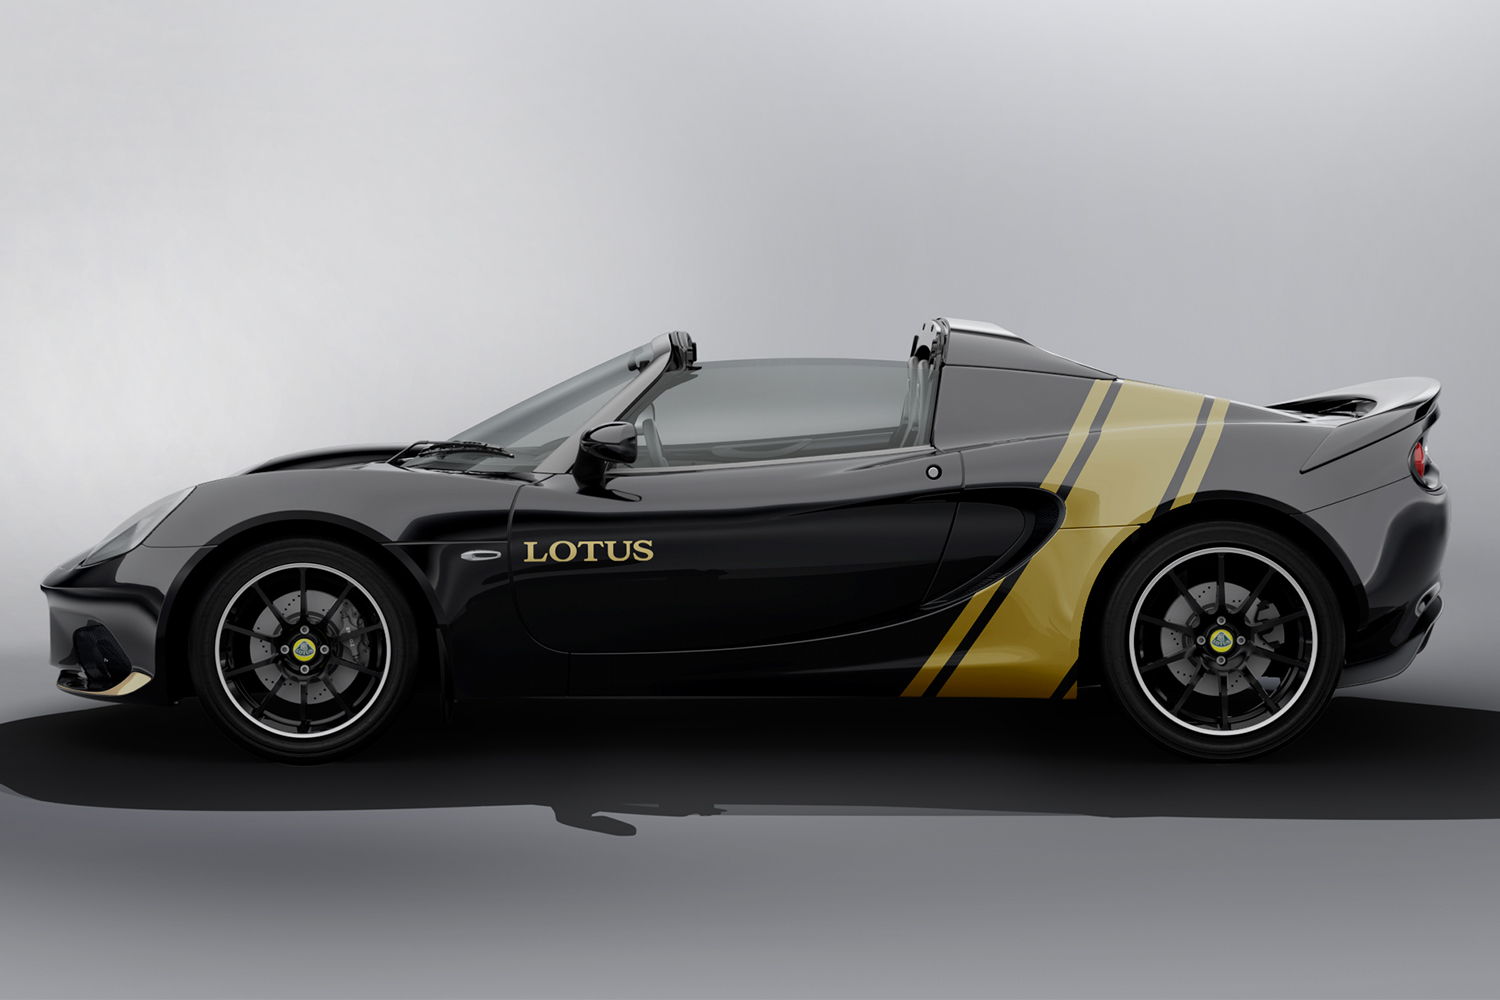 Lotus Elise Classic Heritage Editions black and gold